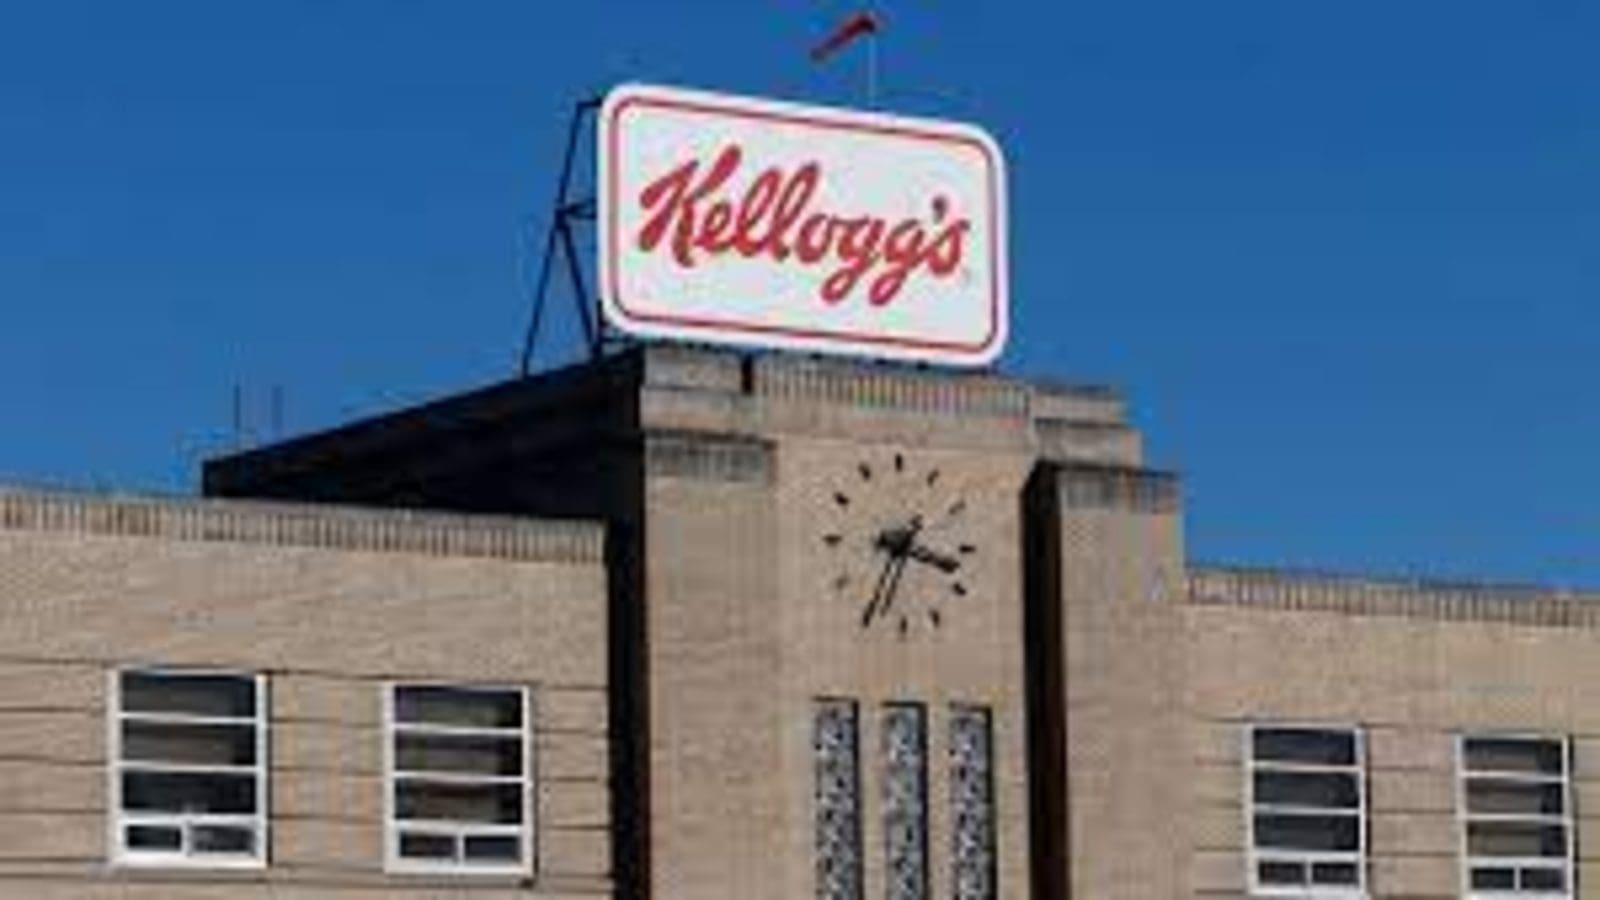 Executive Appointment Roundup: New appointments at Kellogg, Triumph Foods, Mars Wrigley, and Licious 